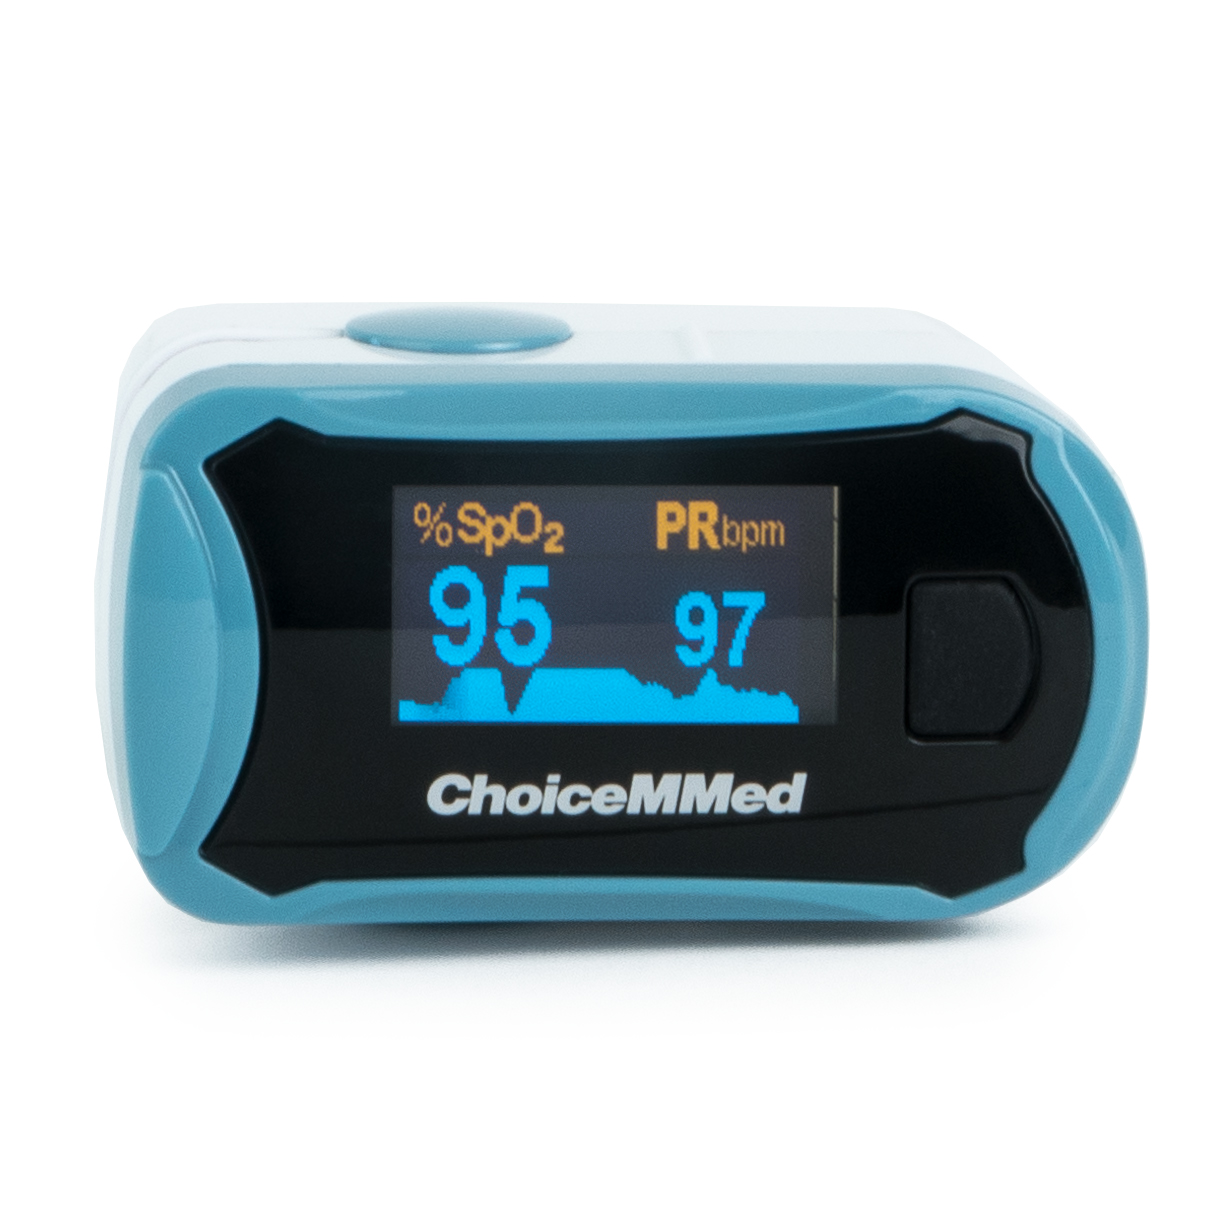 The screen of a blue and white pulse oximeter showing heart rate.